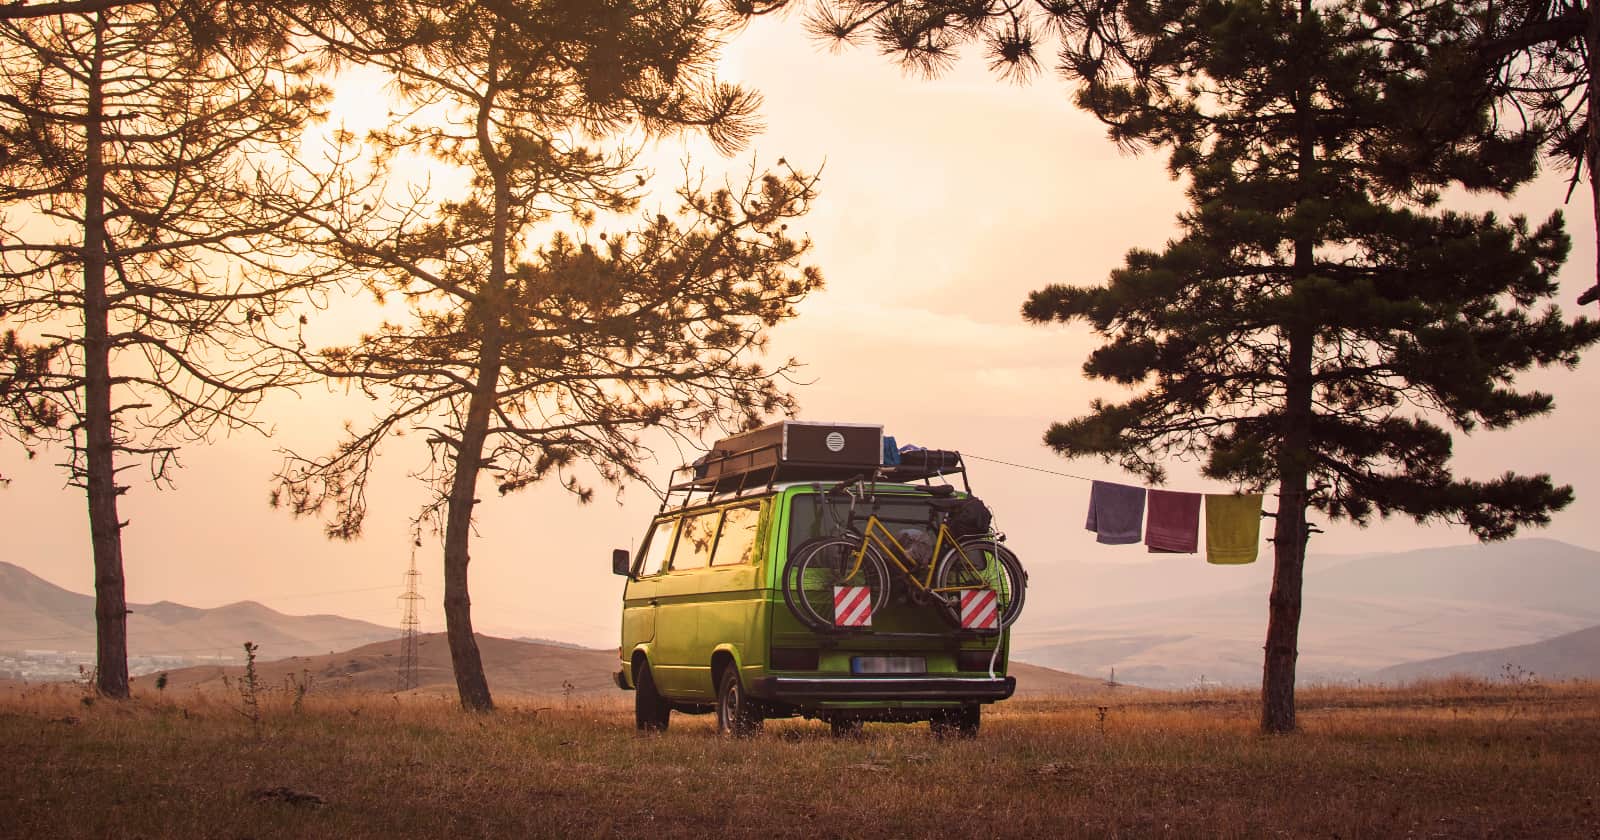 Finding the right camper van can take some time and planning